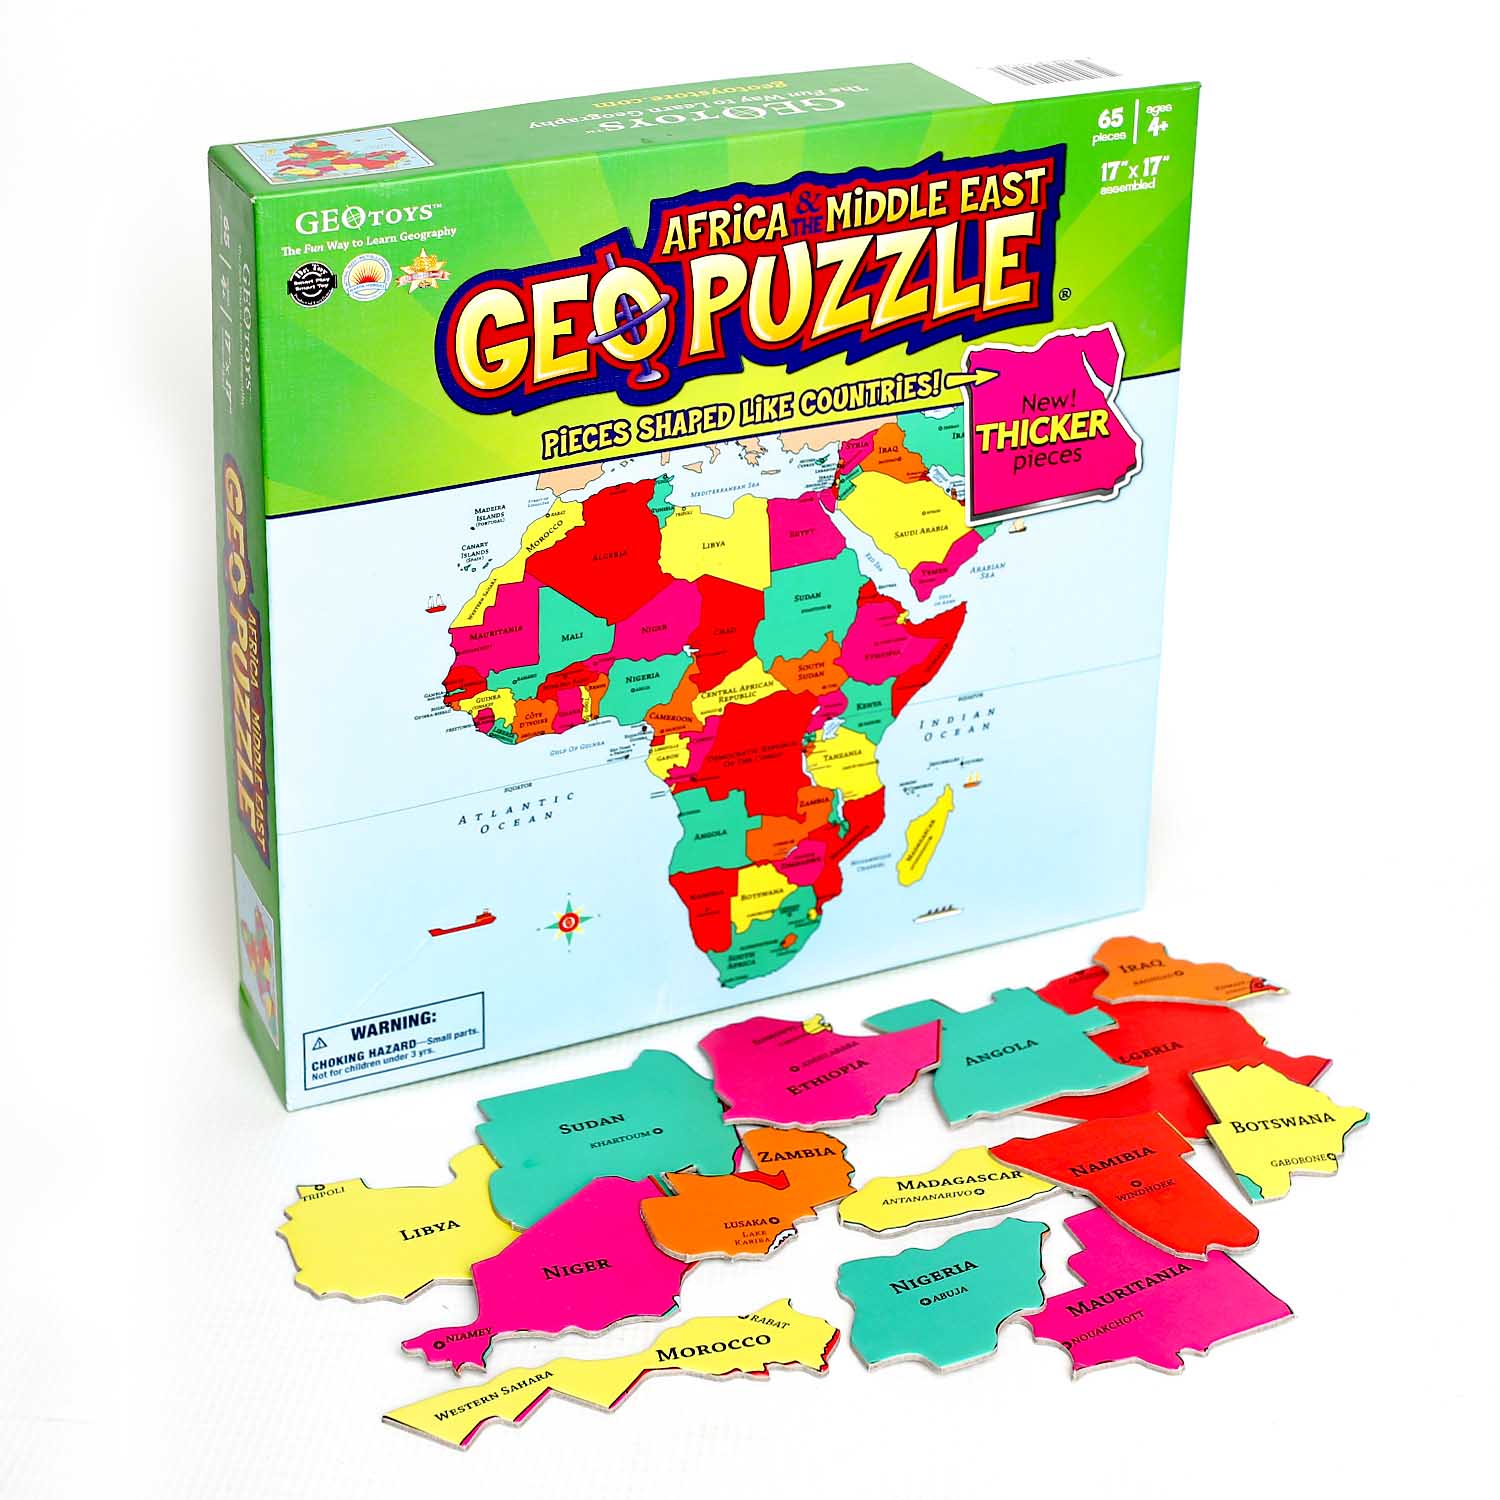 Africa Maps & Geography Jigsaw Puzzle